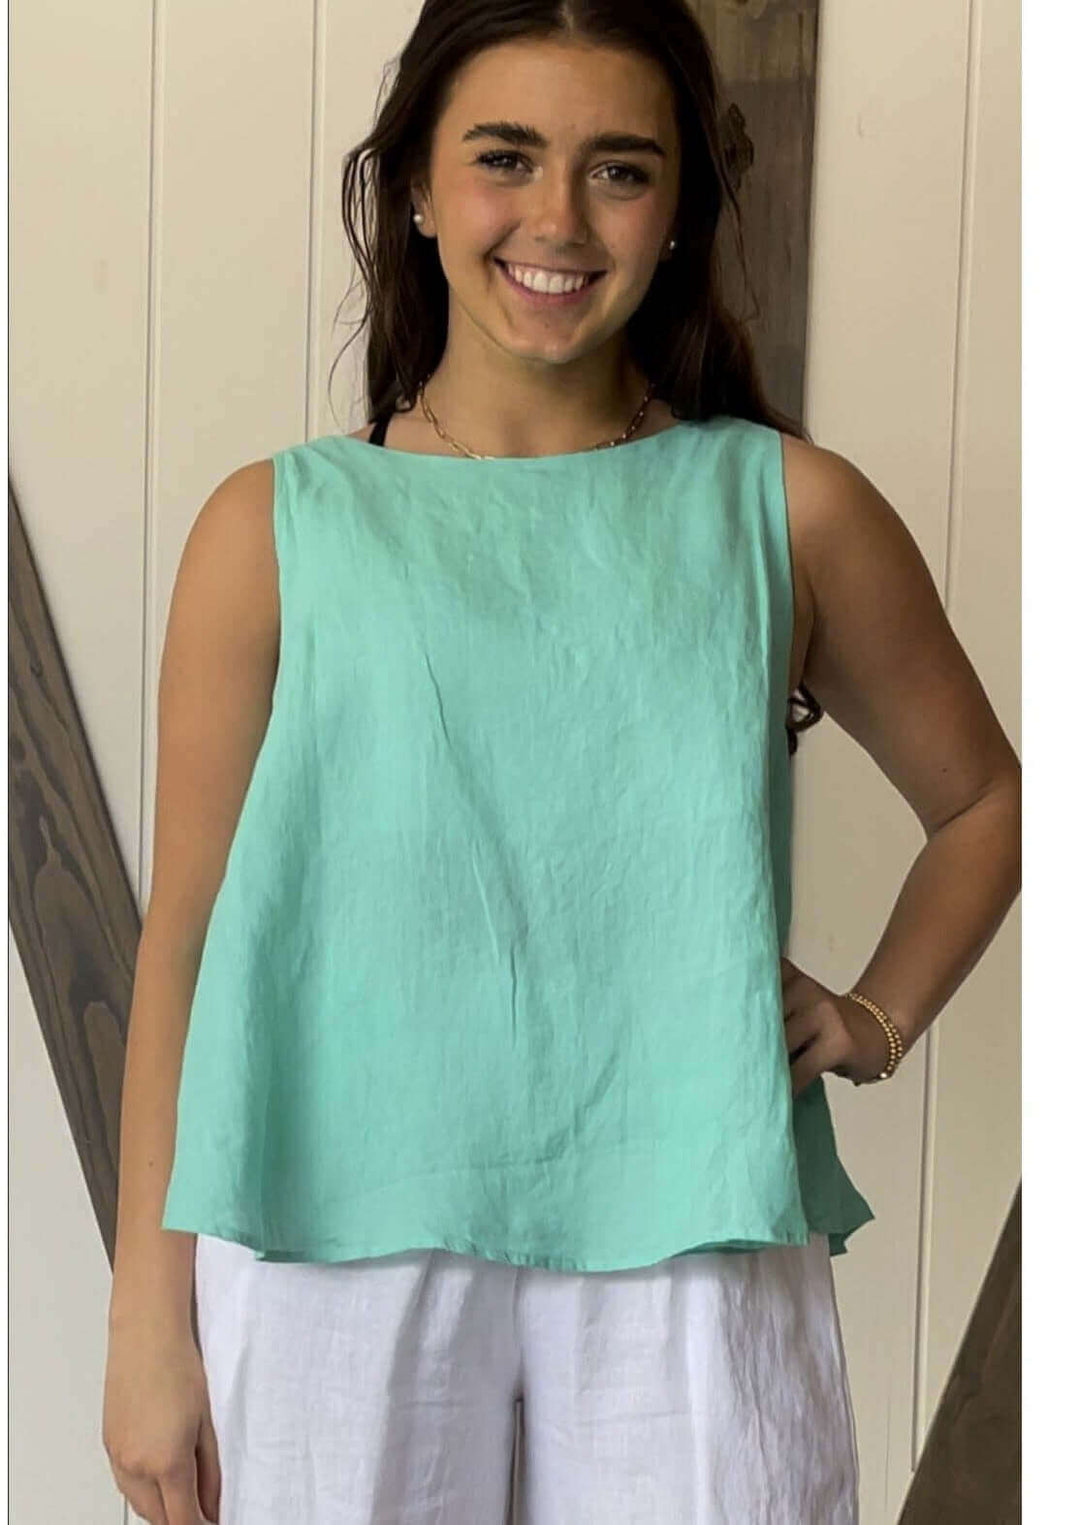 USA Made 100% Linen Ladies Sleeveless Double Layer Aqua Blue Green Top | Match Point Style PLT2374 | Classy Cozy Cool Women's Made in America Boutique